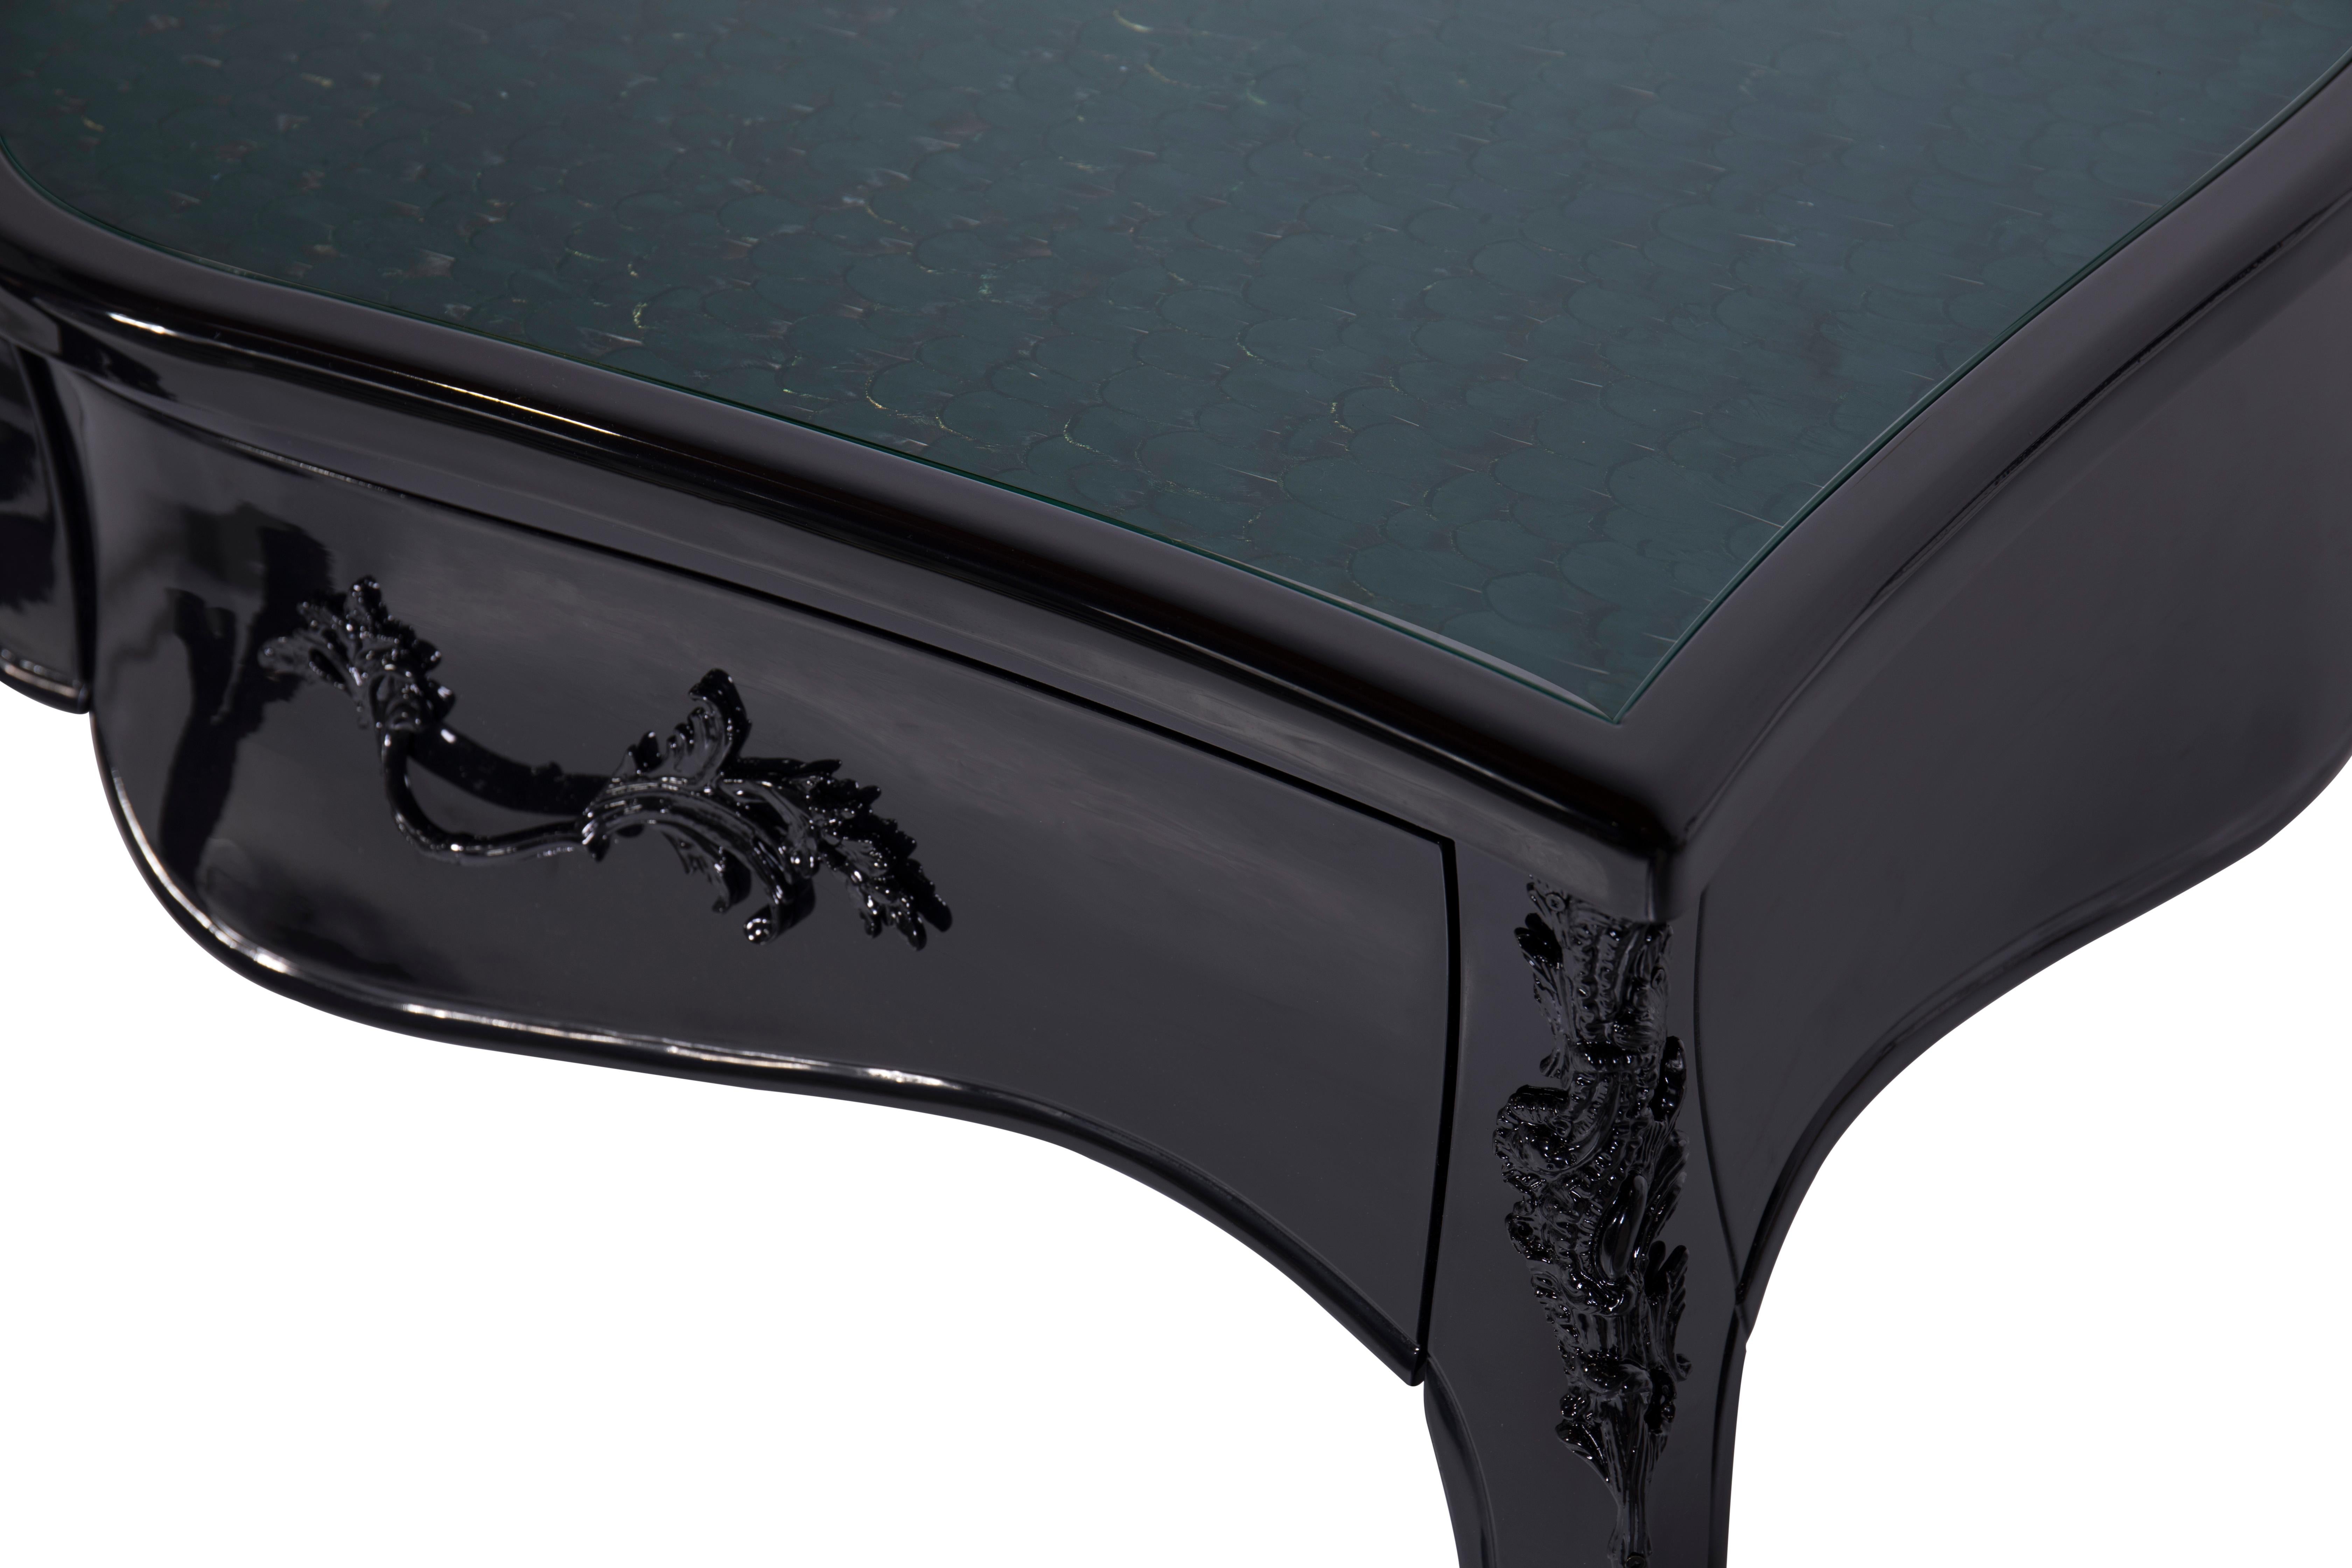 Classic design meets exotic opulence. French cabriole legs and exquisite metal ormolu support an exuberant peacock feather surface.

Structure: Black lacquer with high gloss finish 
Top: Covered in iridescent peacock feathers protected by a layer of